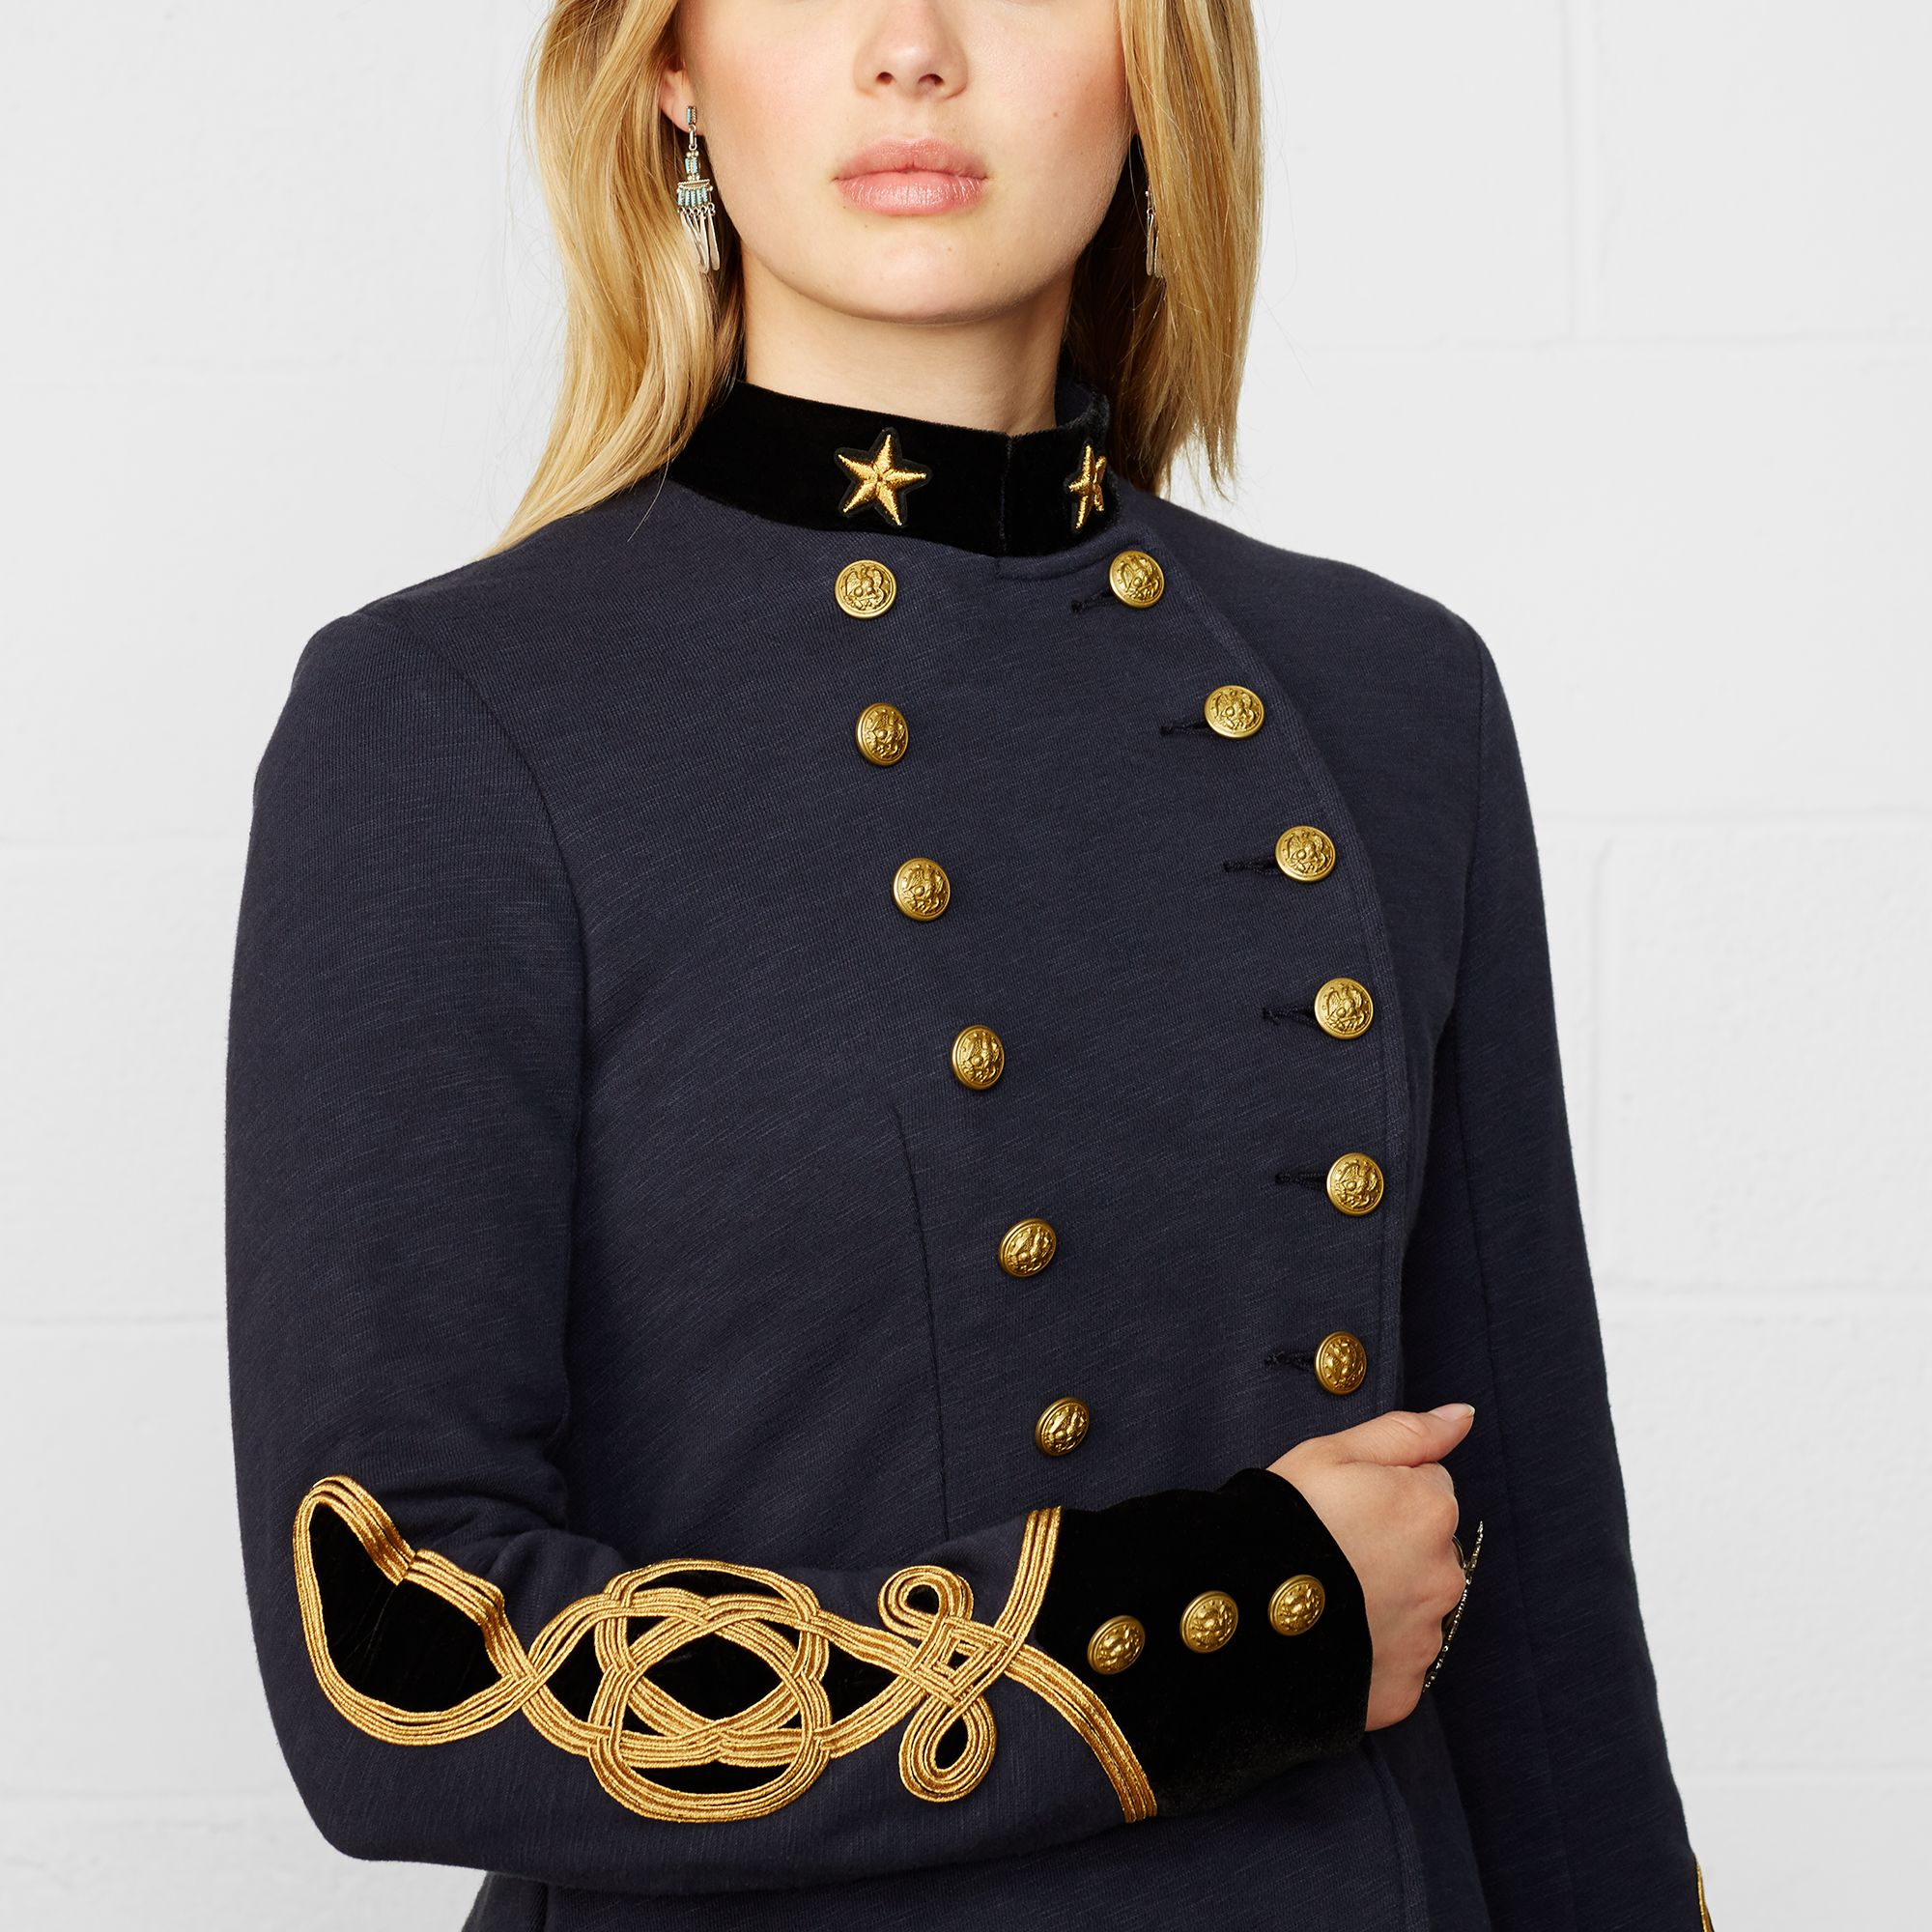 25 Must Have Military Jackets For Women for Summer and Fall!